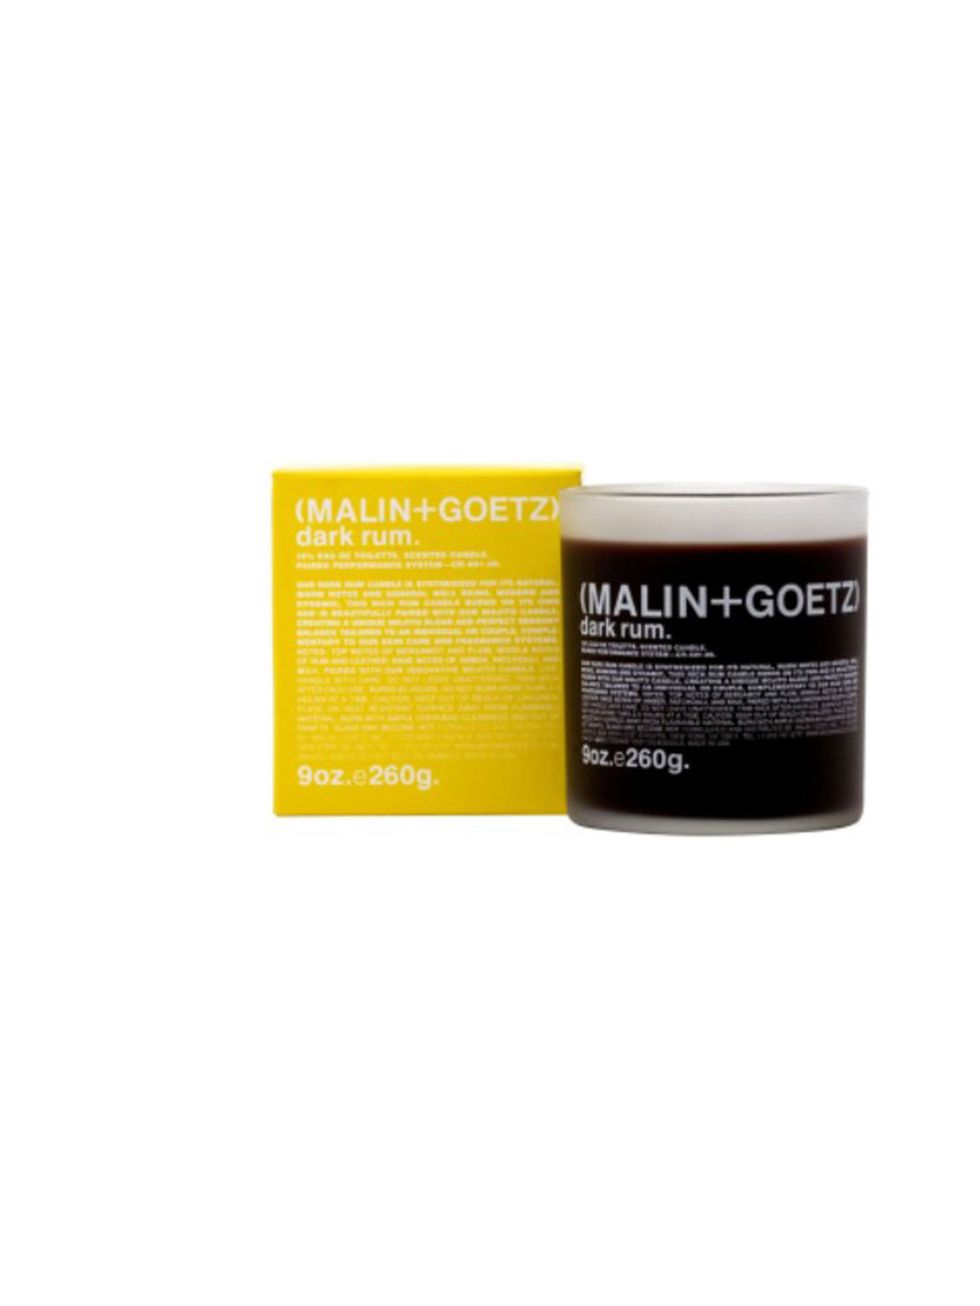 <p>Embrace the onset of Autumn with the scent of this deep rum, leather and patchouli candle.  Perfect for at-home weekends.</p><p><strong><a href="http://www.elleuk.com/beauty/beauty-notes-daily/malin-goetz-pop-up-in-london">Malin+Goetz</a> Dark Rum scen